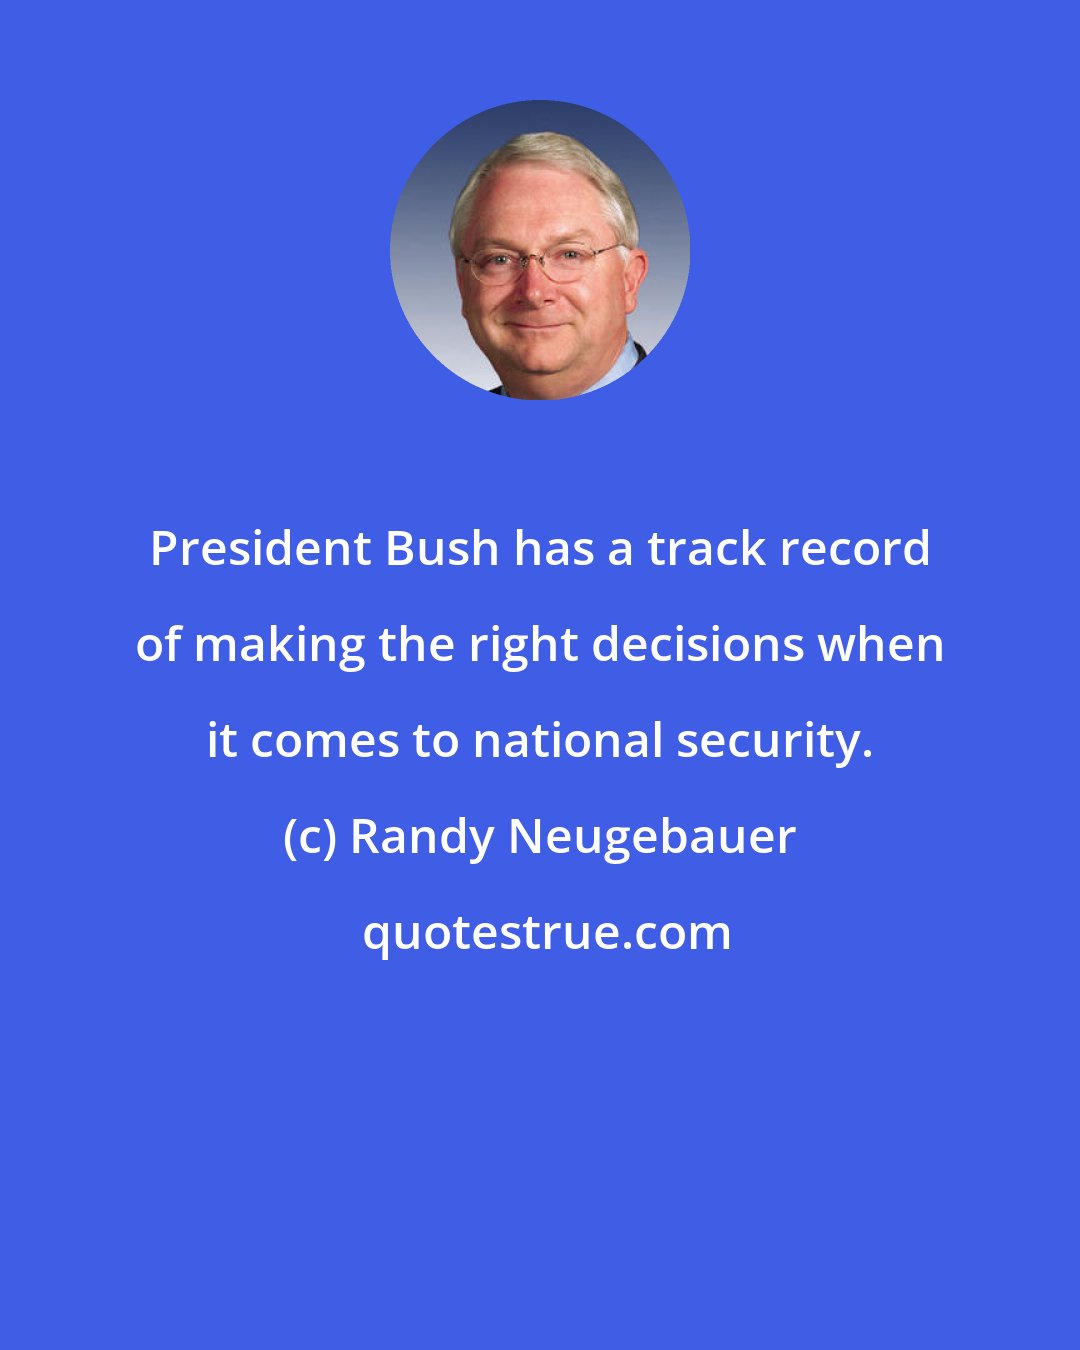 Randy Neugebauer: President Bush has a track record of making the right decisions when it comes to national security.